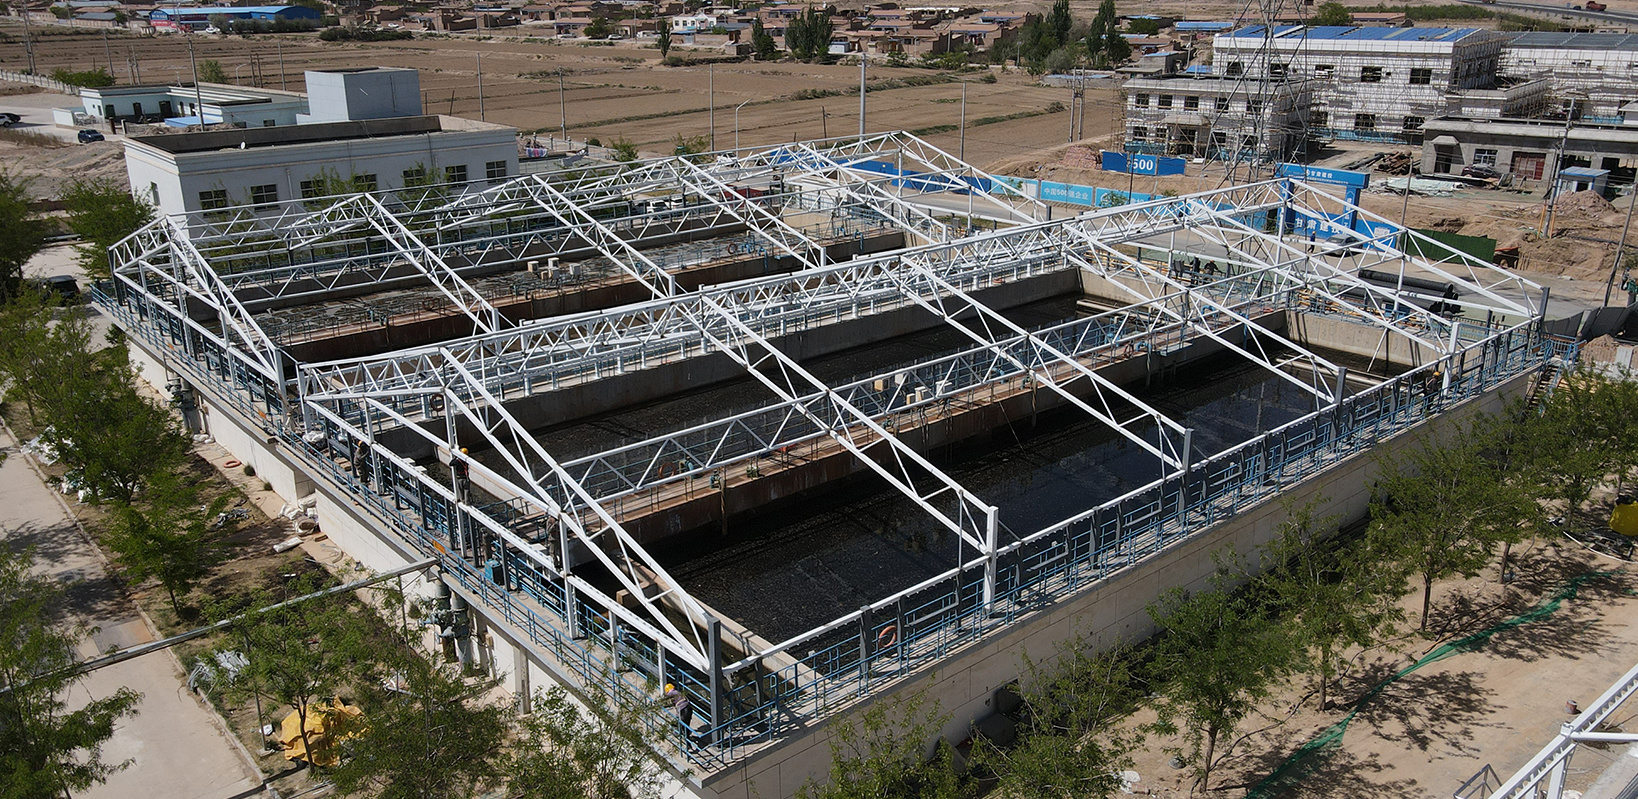 Membrane structure capping of Jingtai sewage treatment plant in Gansu Province